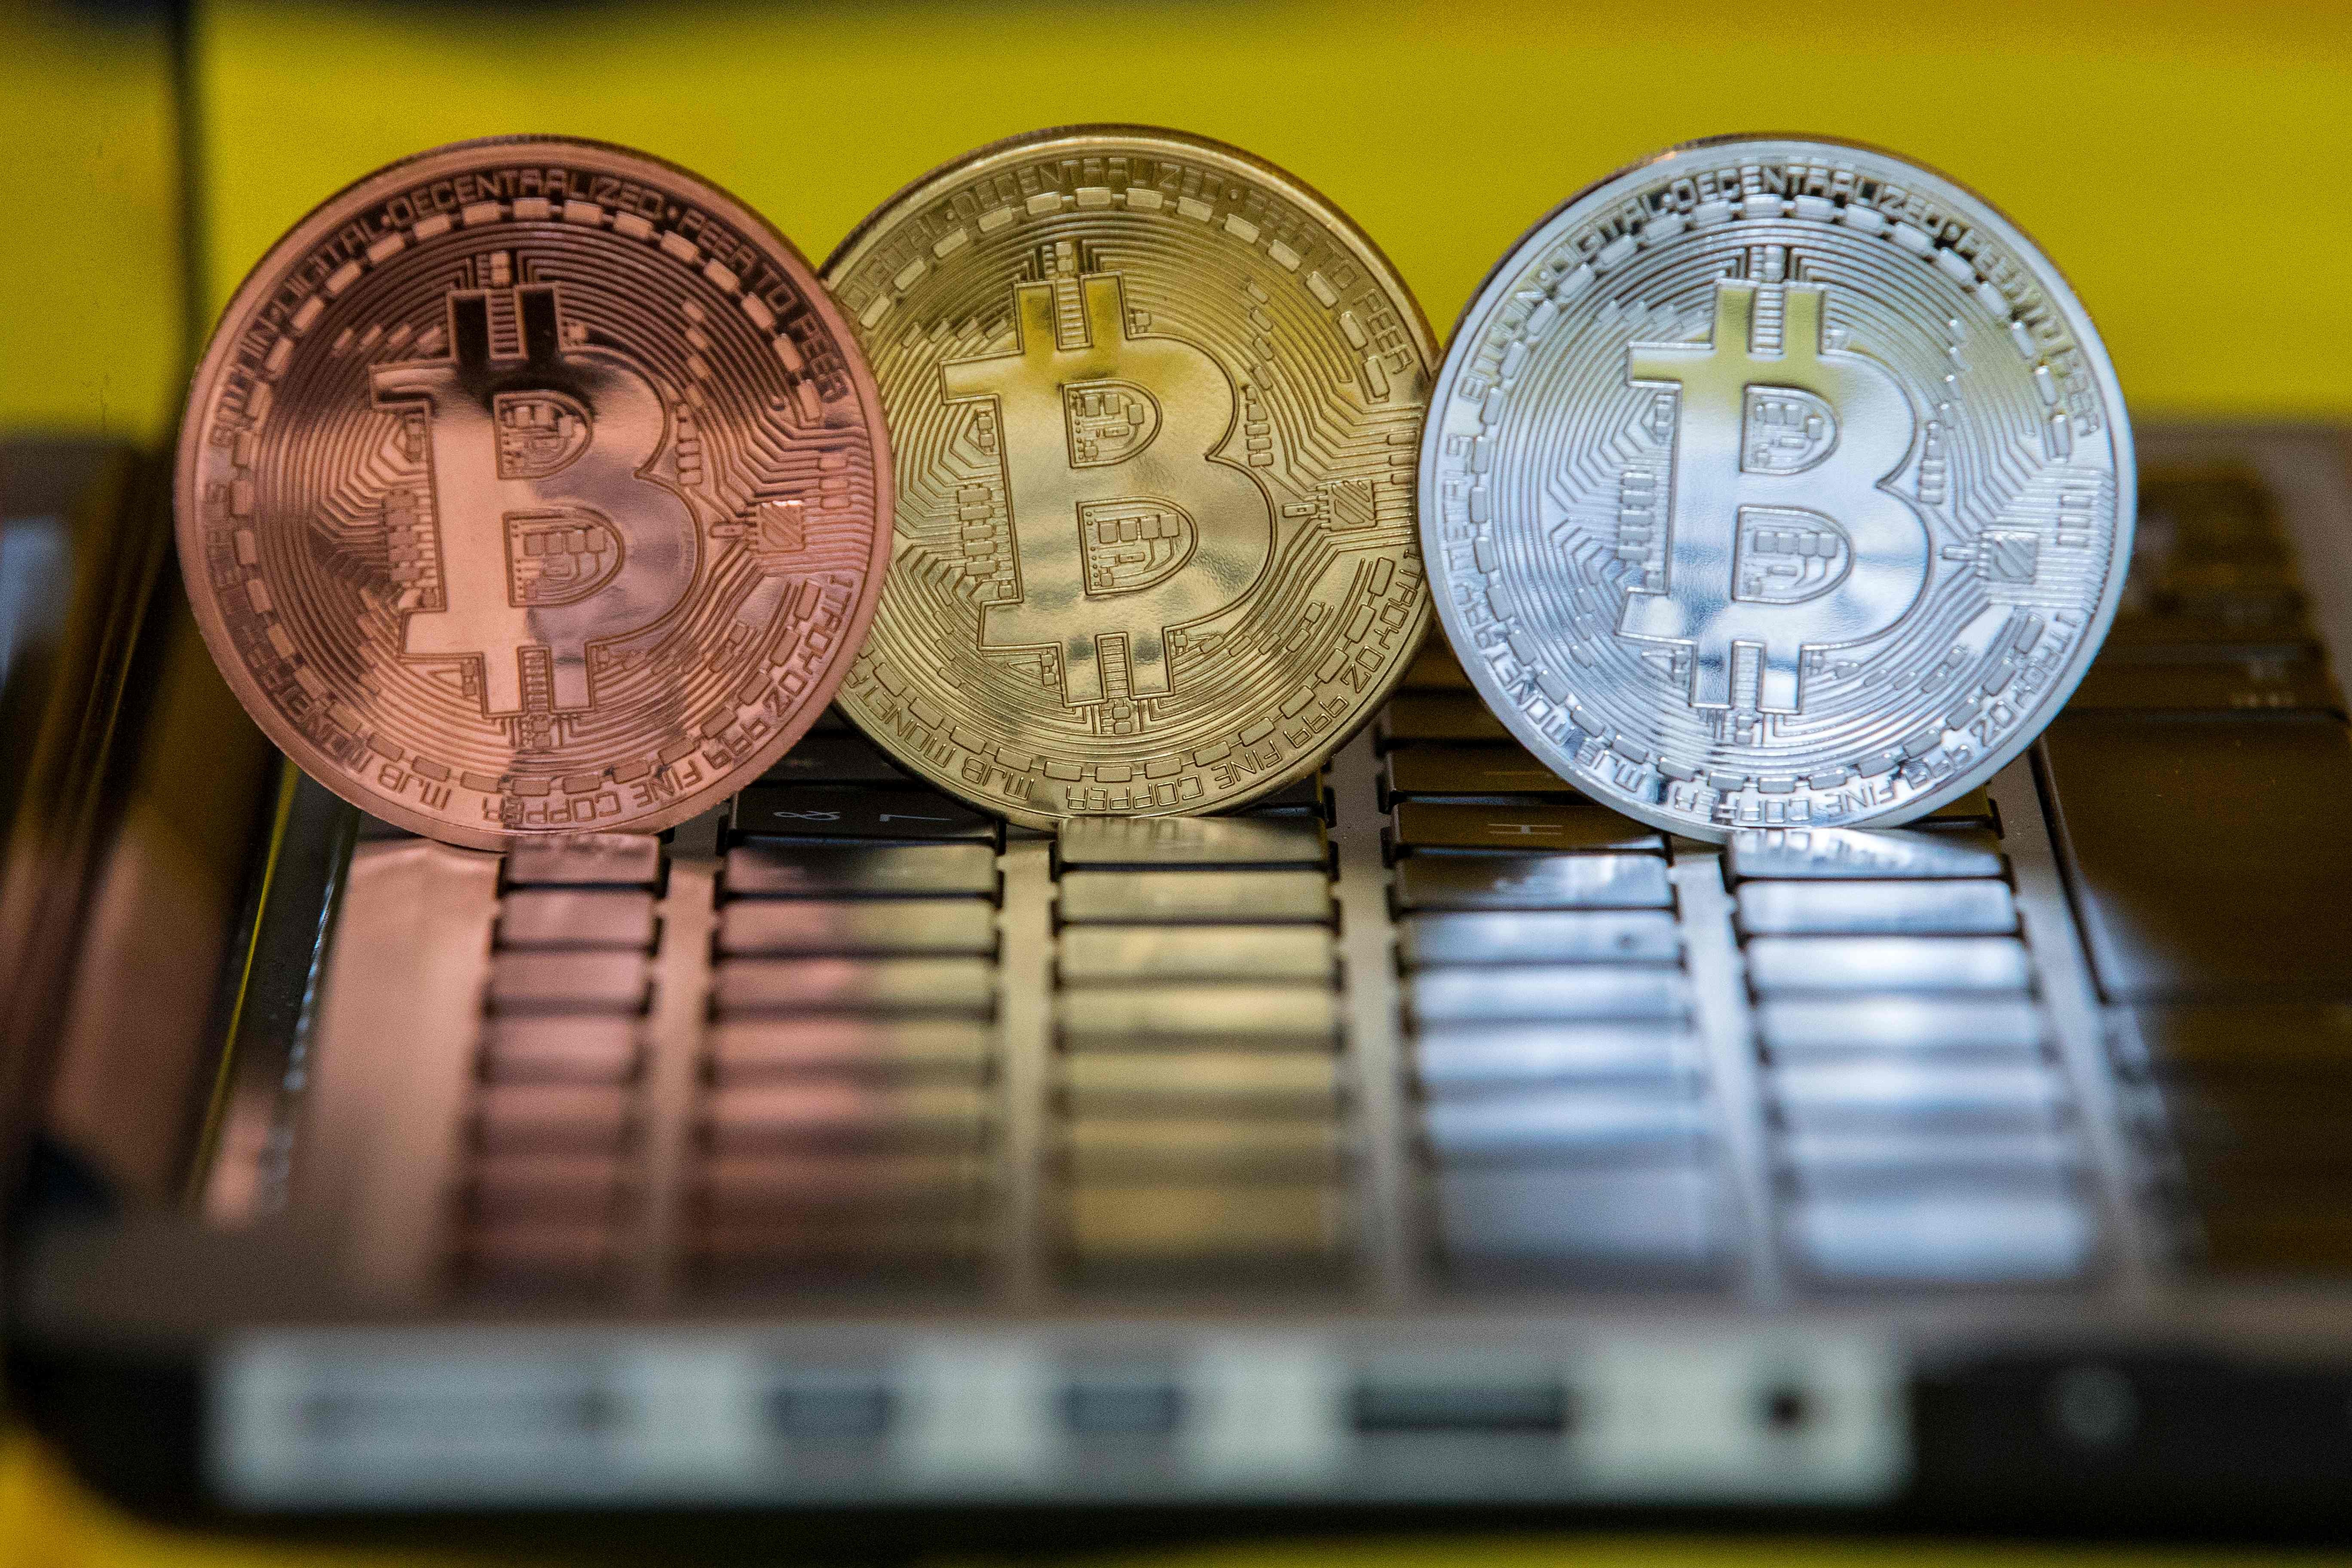 Beijing’s crackdown on digital currencies is sending investors into the arms of the perennial competitors